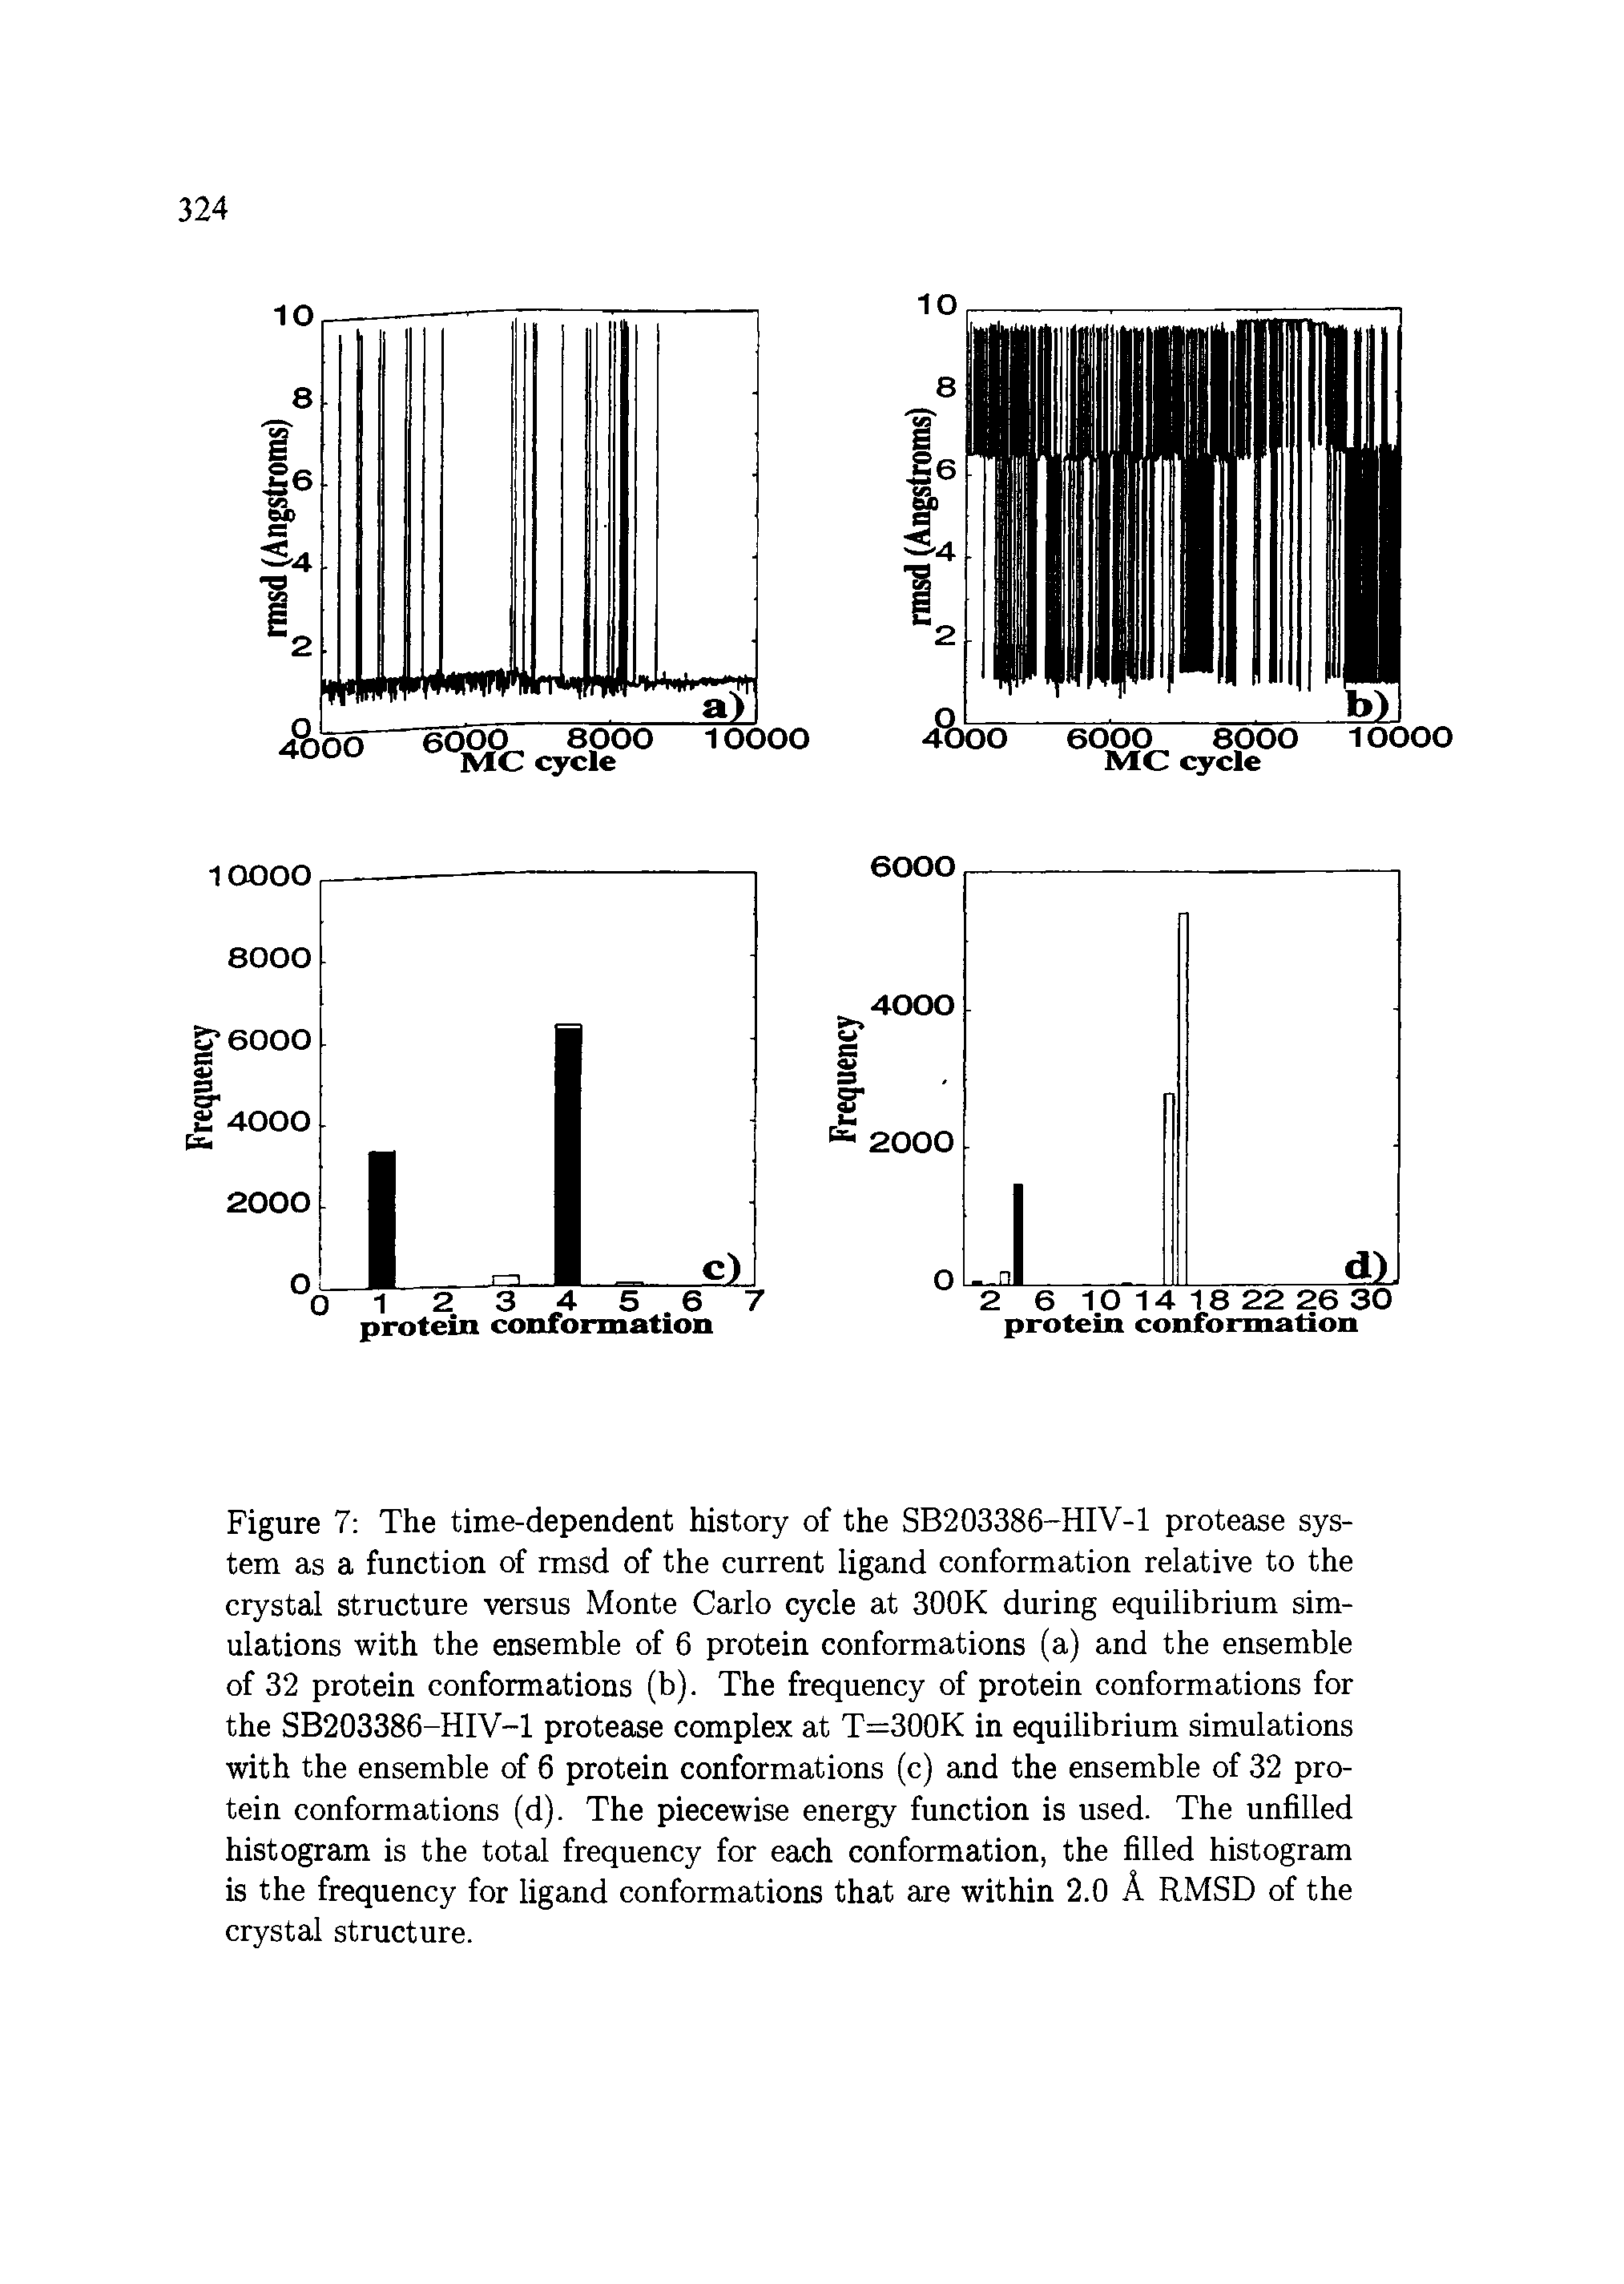 Figure 7 The time-dependent history of the SB203386-HIV-1 protease system as a function of rmsd of the current ligand conformation relative to the crystal structure versus Monte Carlo cycle at 300K during equilibrium simulations with the ensemble of 6 protein conformations (a) and the ensemble of 32 protein conformations (b). The frequency of protein conformations for the SB203386-HIV-1 protease complex at T=300K in equilibrium simulations with the ensemble of 6 protein conformations (c) and the ensemble of 32 protein conformations (d). The piecewise energy function is used. The unfilled histogram is the total frequency for each conformation, the filled histogram is the frequency for ligand conformations that are within 2.0 A RMSD of the crystal structure.